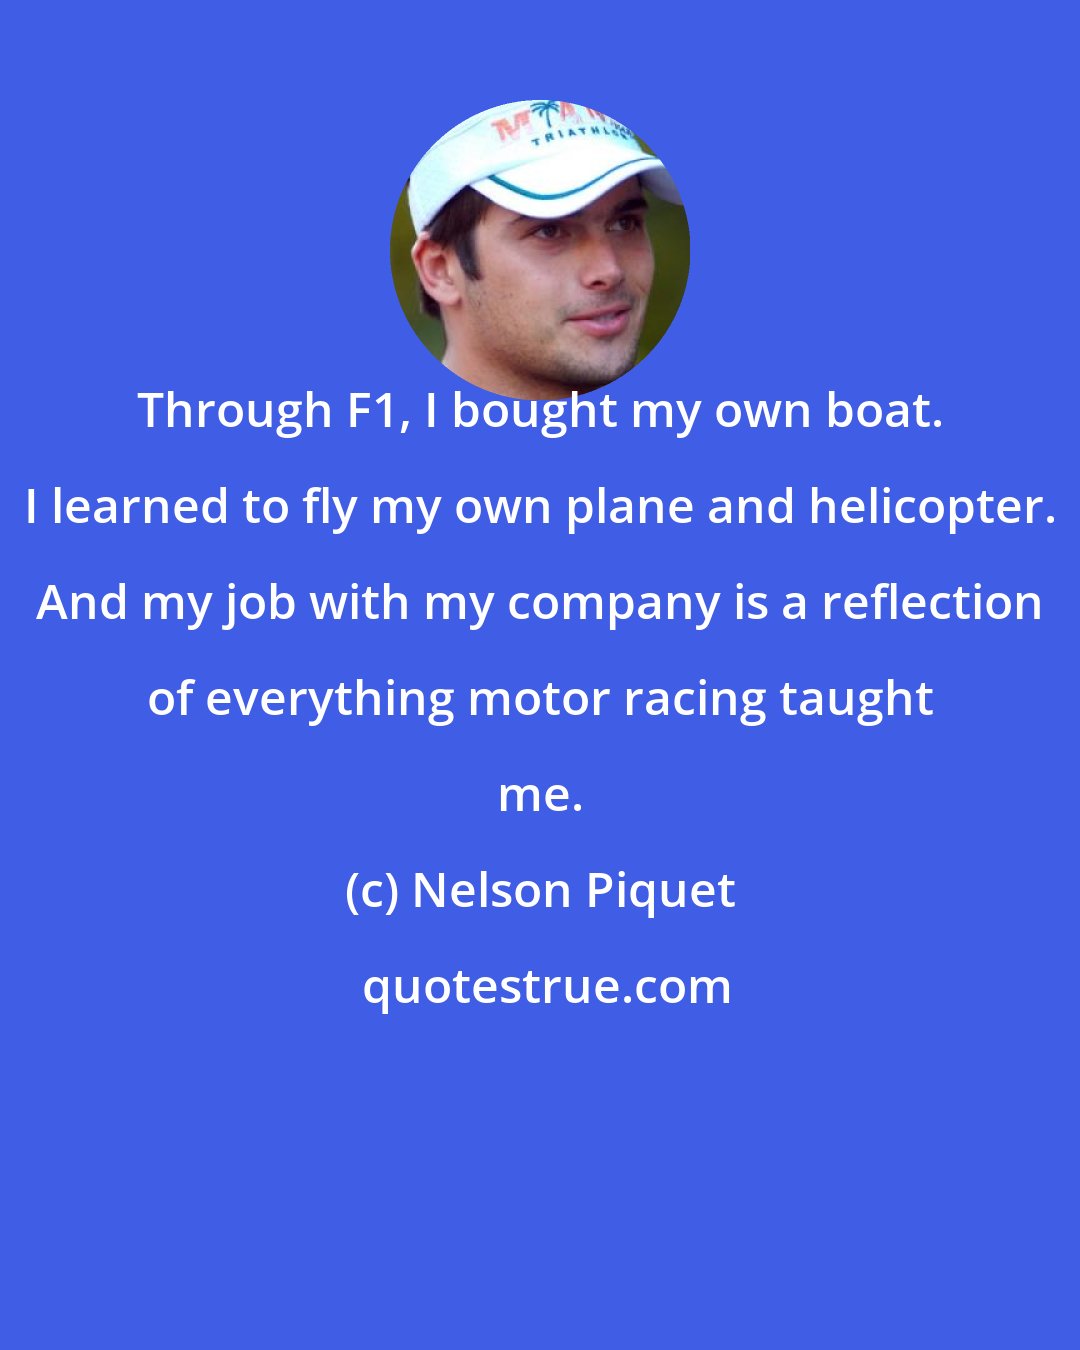 Nelson Piquet: Through F1, I bought my own boat. I learned to fly my own plane and helicopter. And my job with my company is a reflection of everything motor racing taught me.